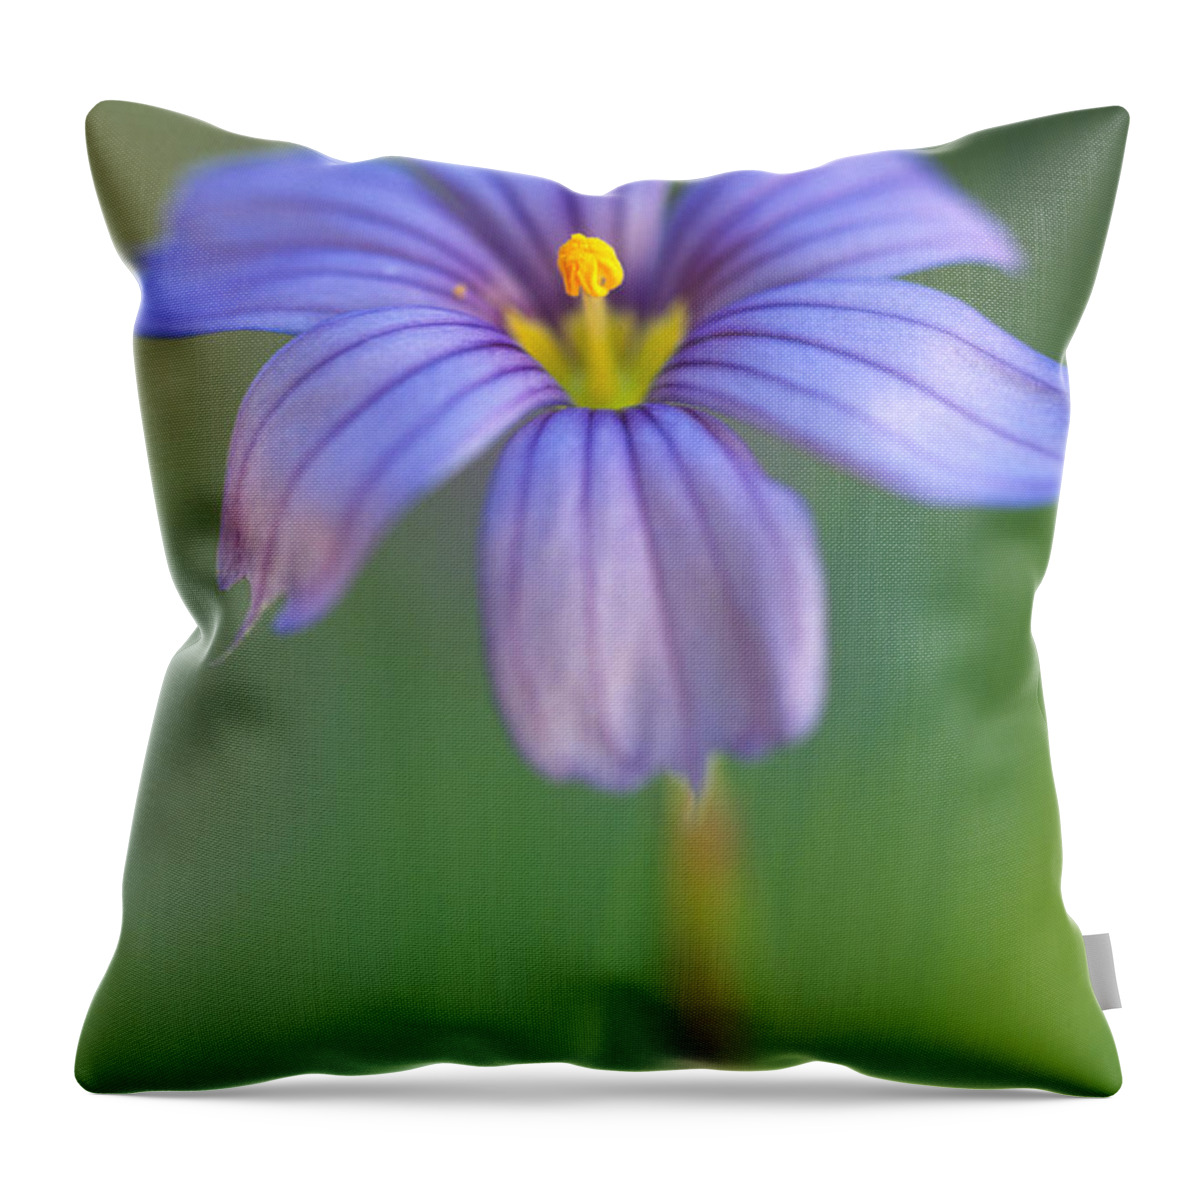 Flowers Throw Pillow featuring the photograph Blue Eyed Grass 2 by Kathy Yates